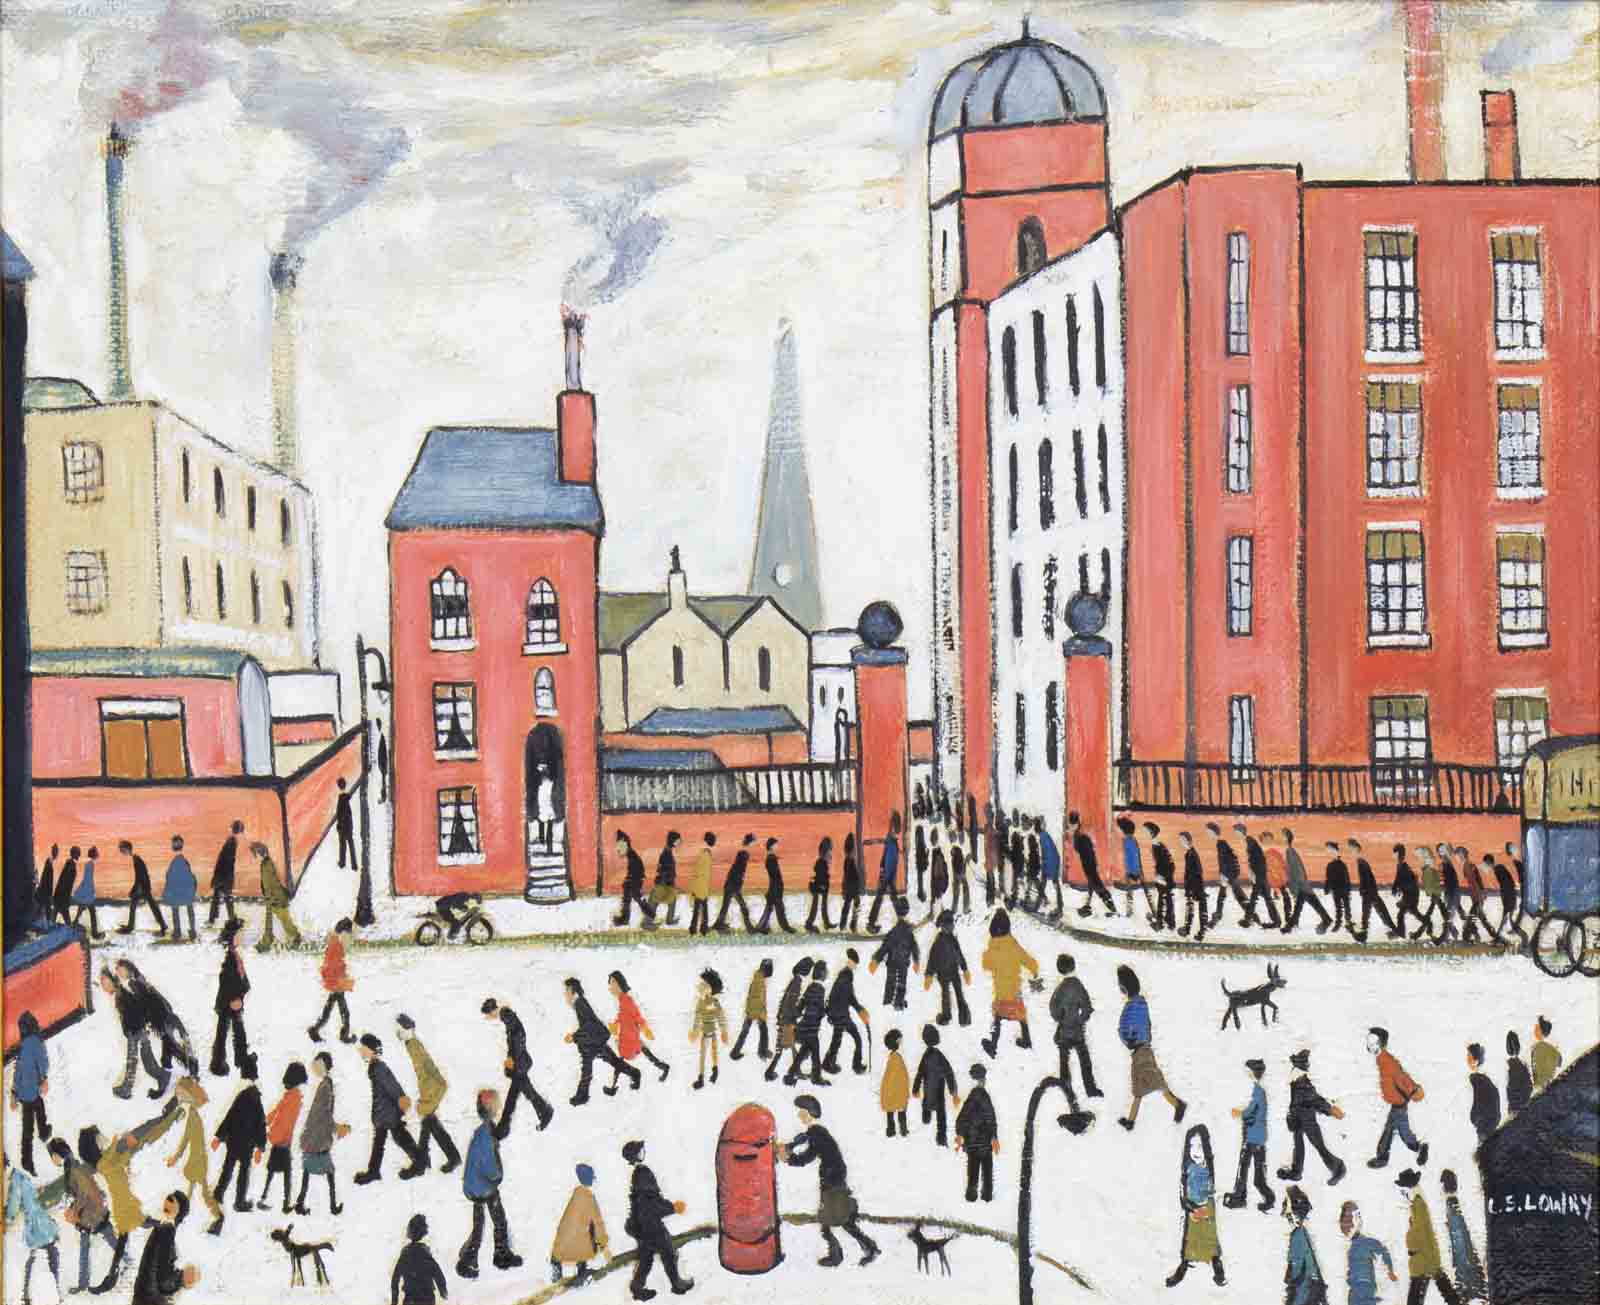 The Rush Hour after L.S.Lowry